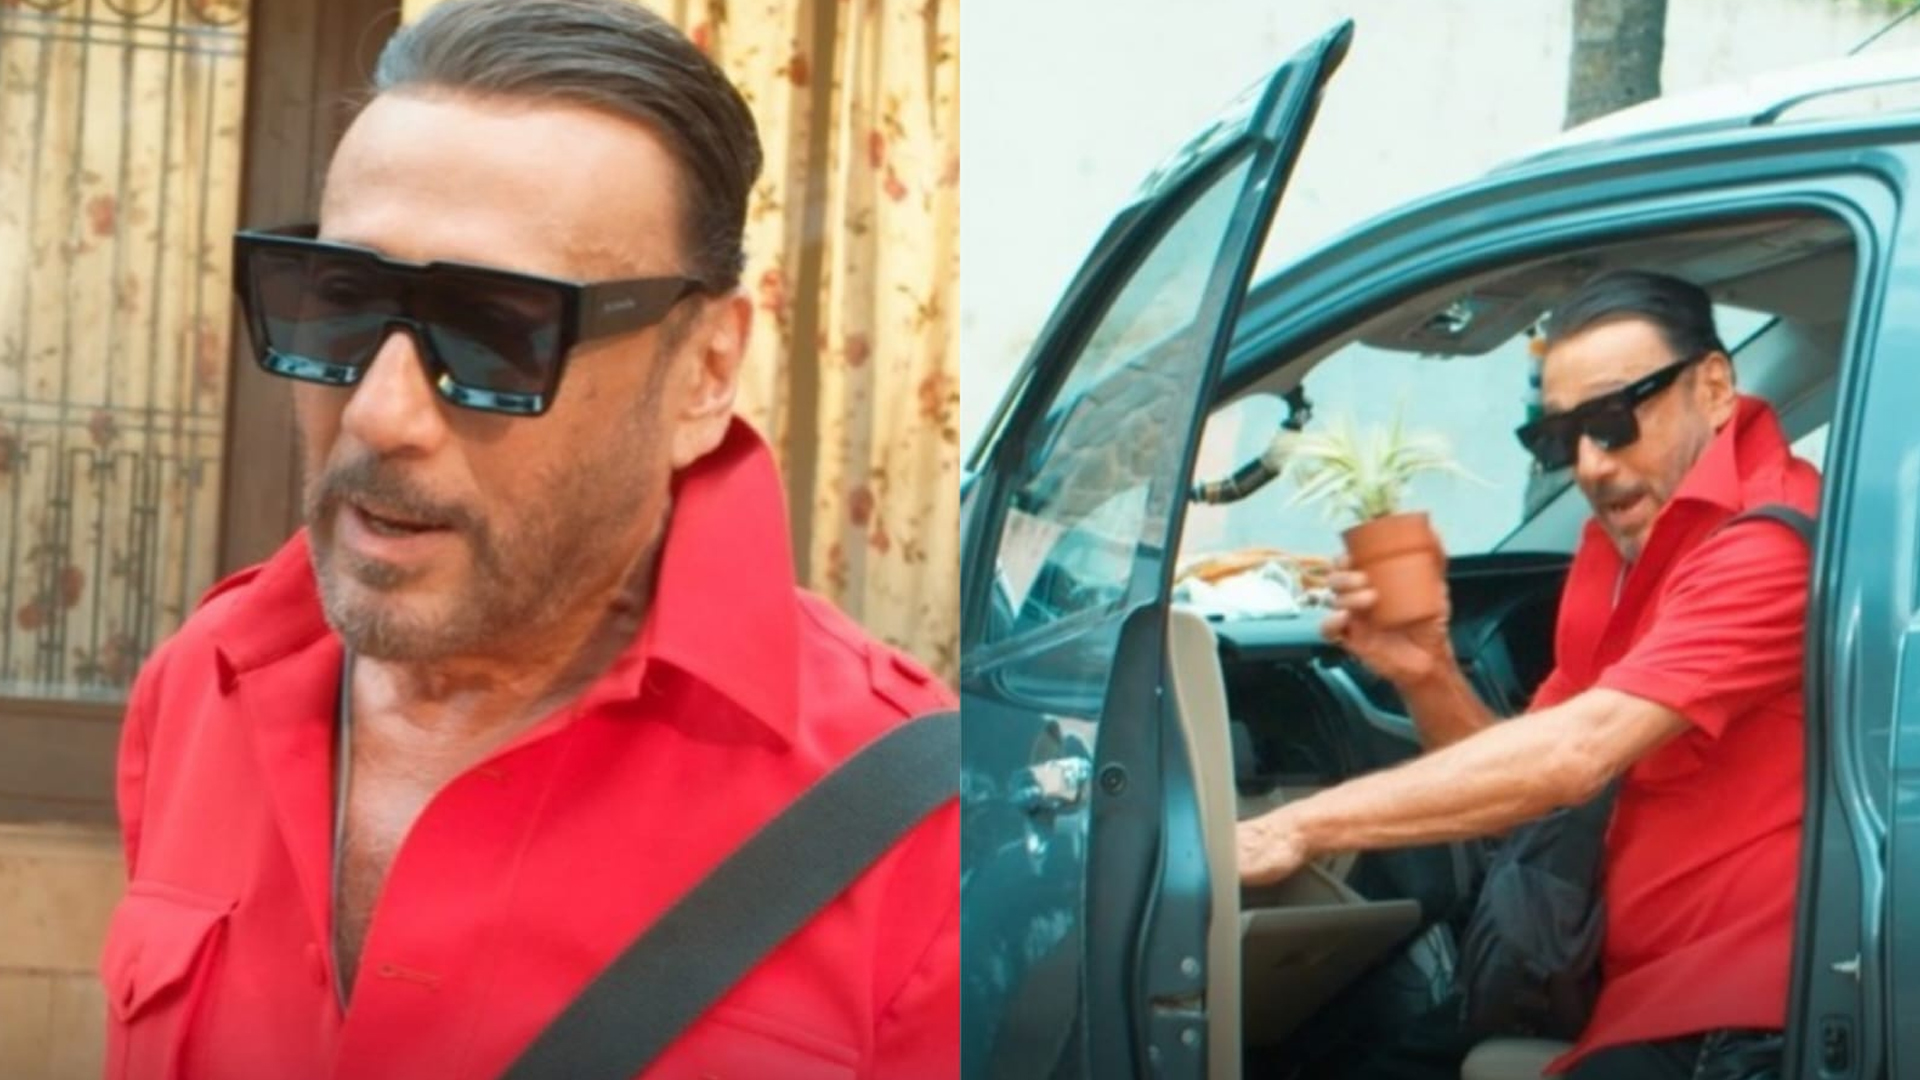 Bollywood star Jackie Shroff educated the paps in an entertaining way – here’s how!